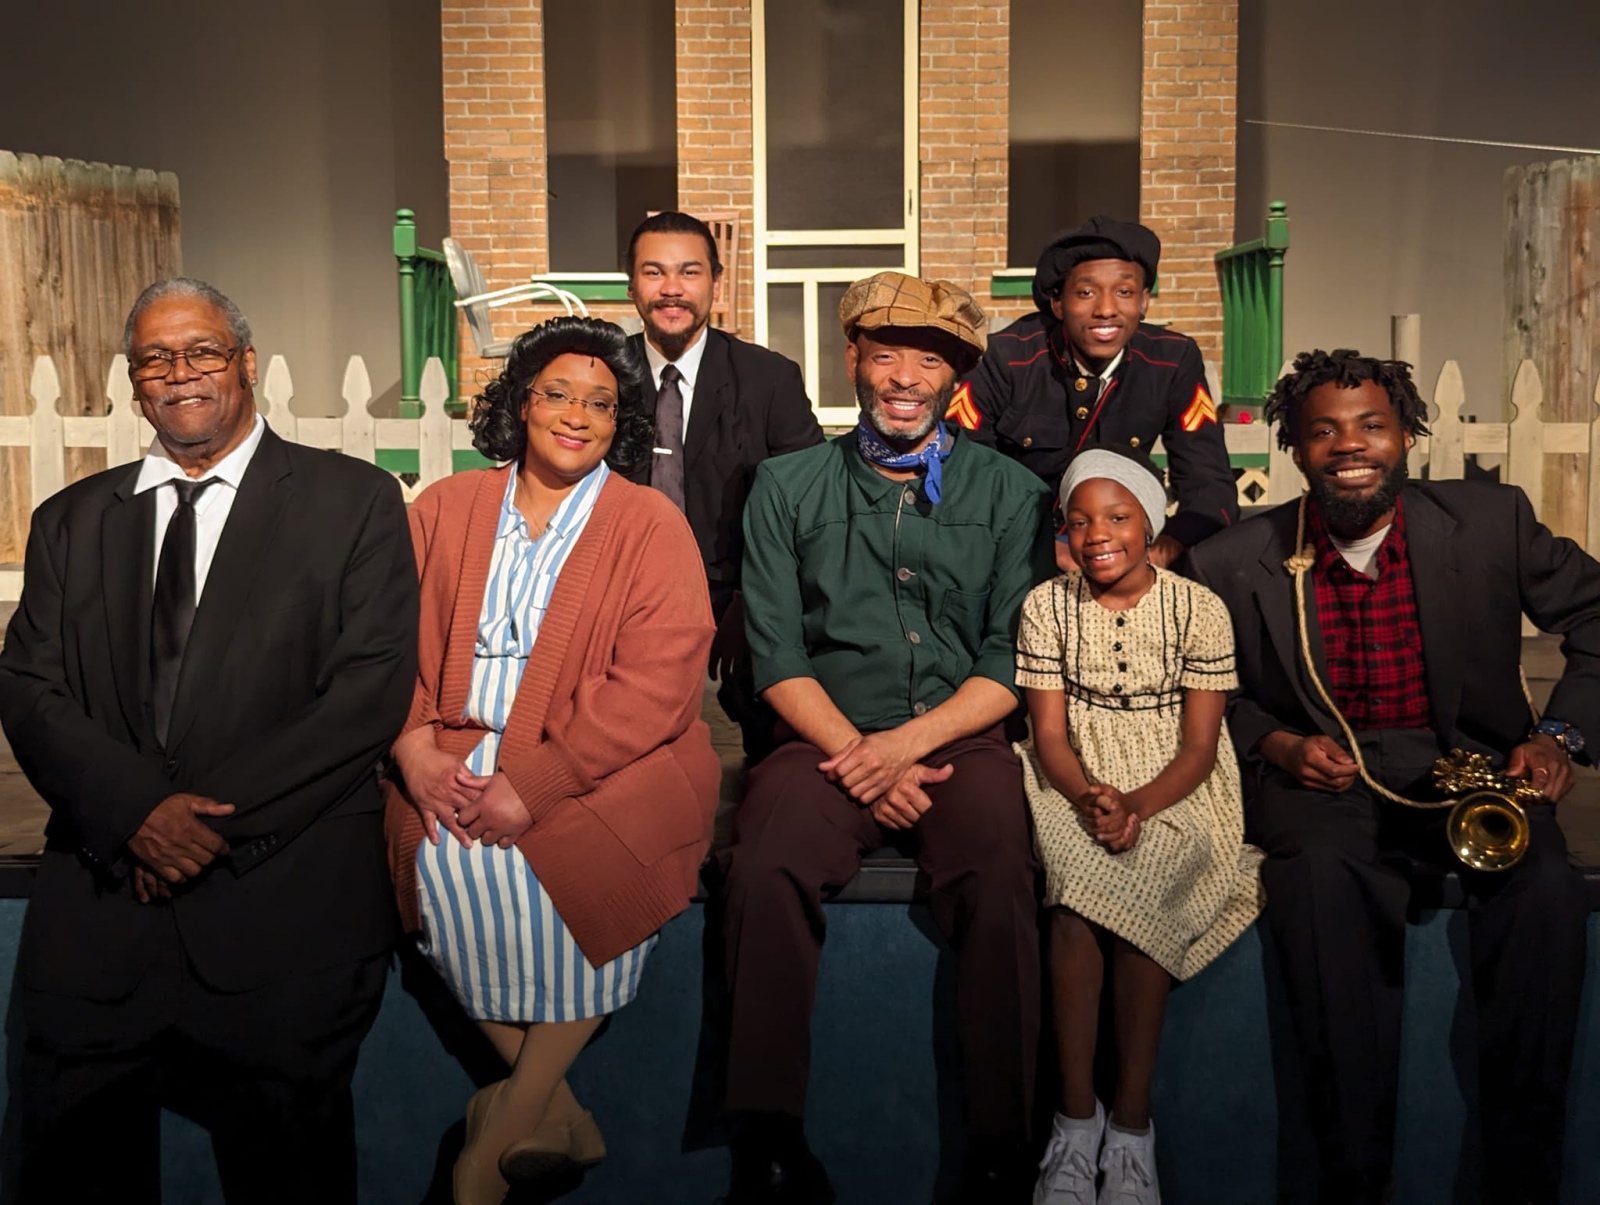 The cast of "Fences" poses for a photo